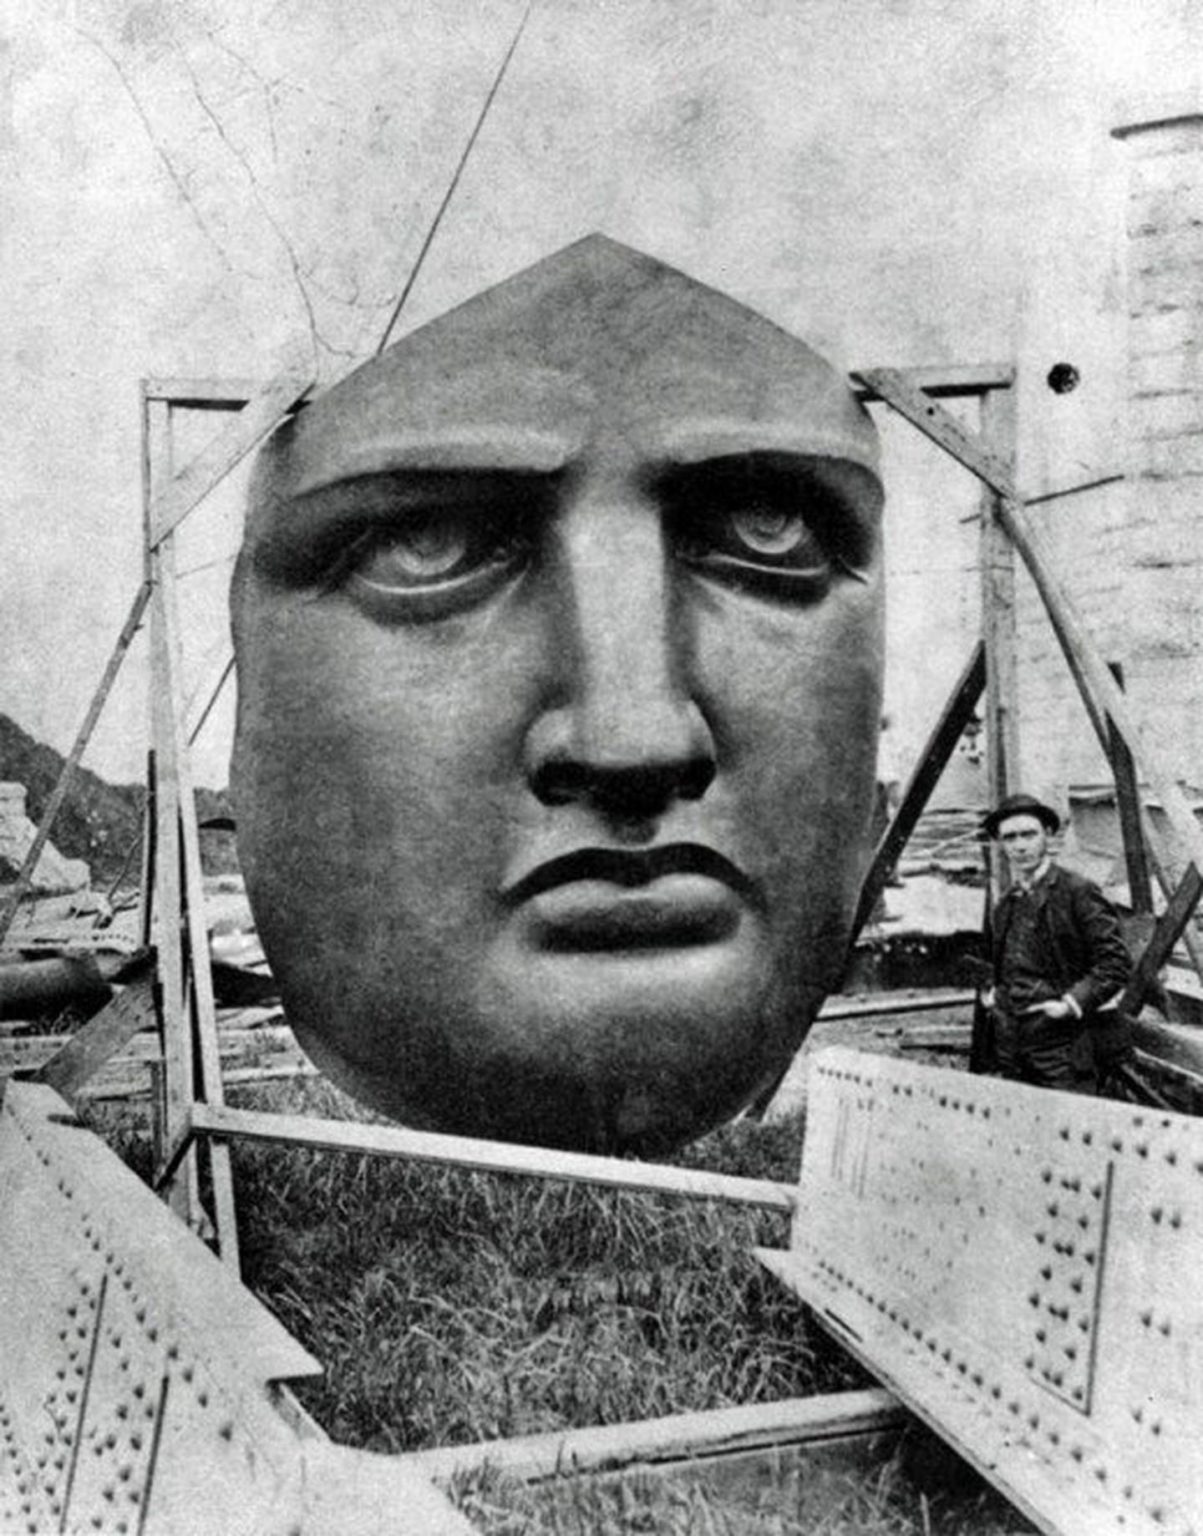 14 Iconic Photos of the Statue of Liberty Under Construction